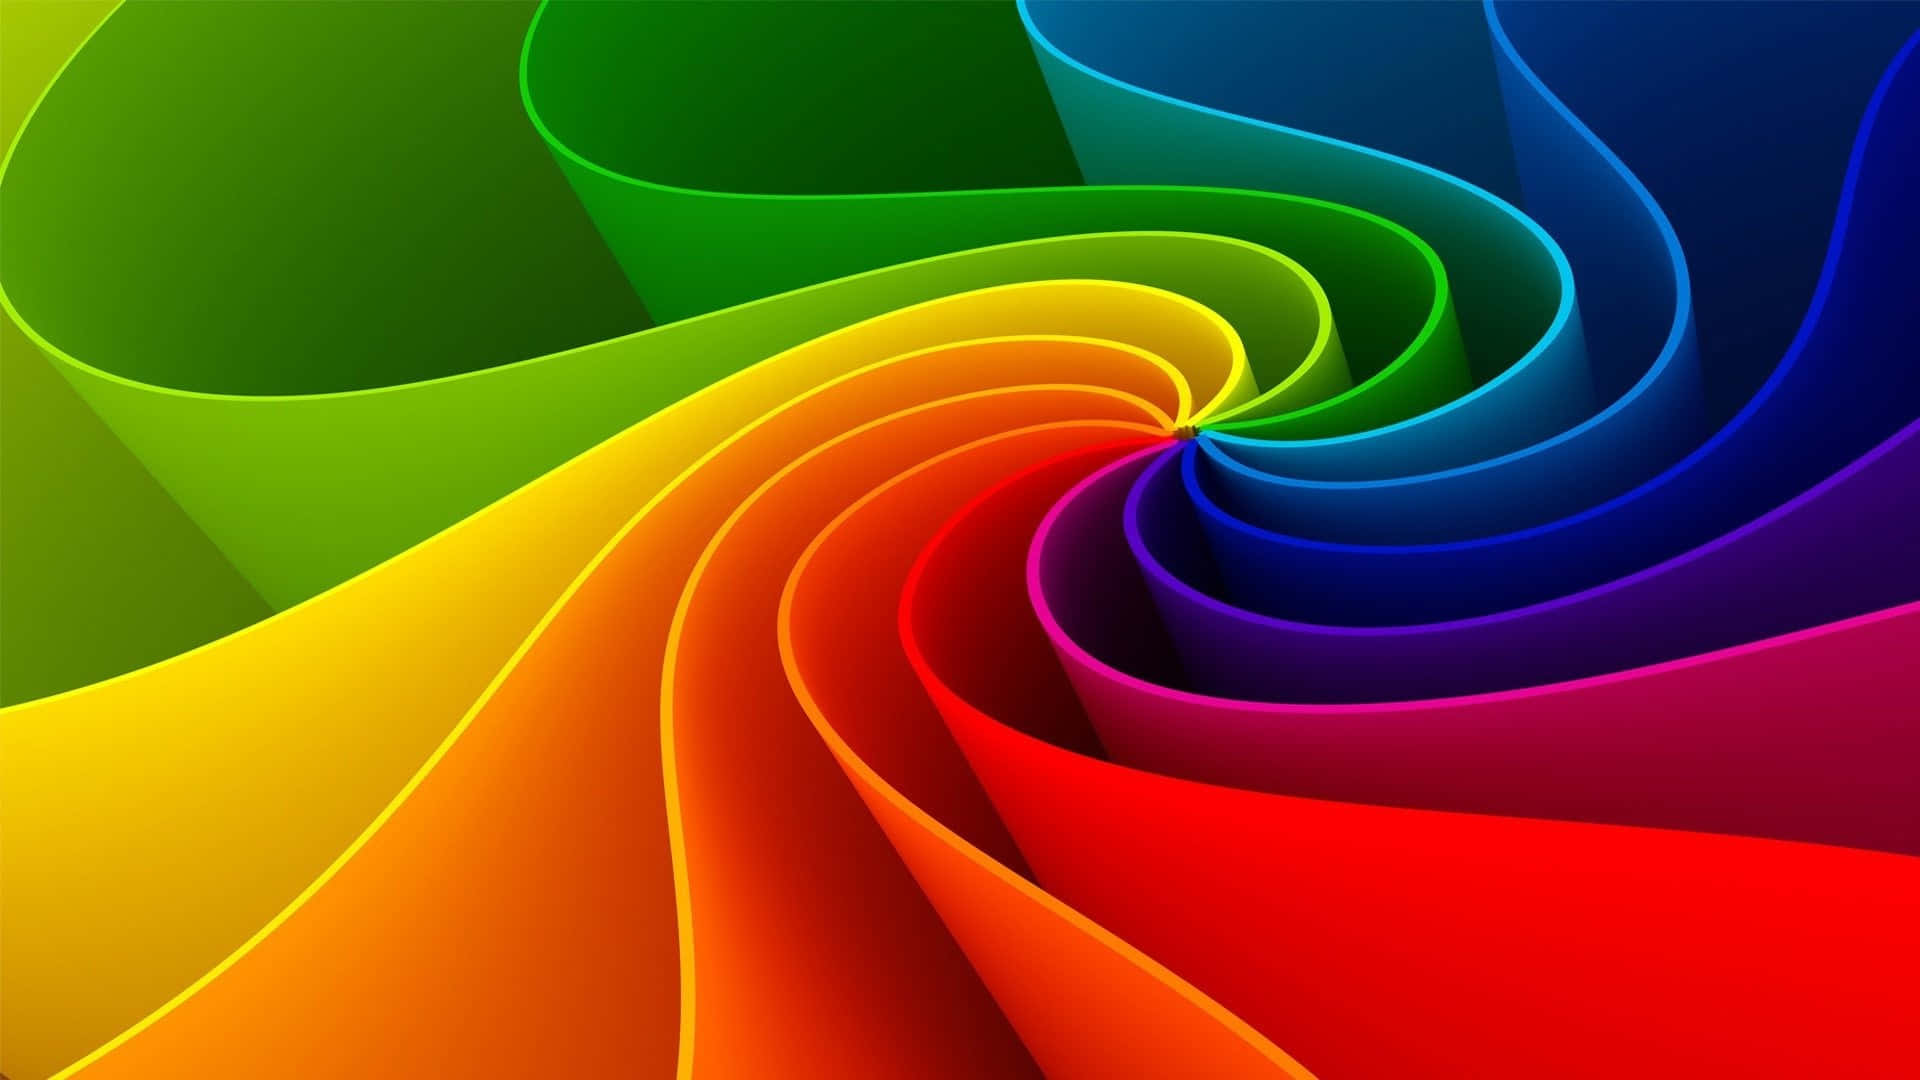 A Colorful Spiral Paper Background Wallpaper